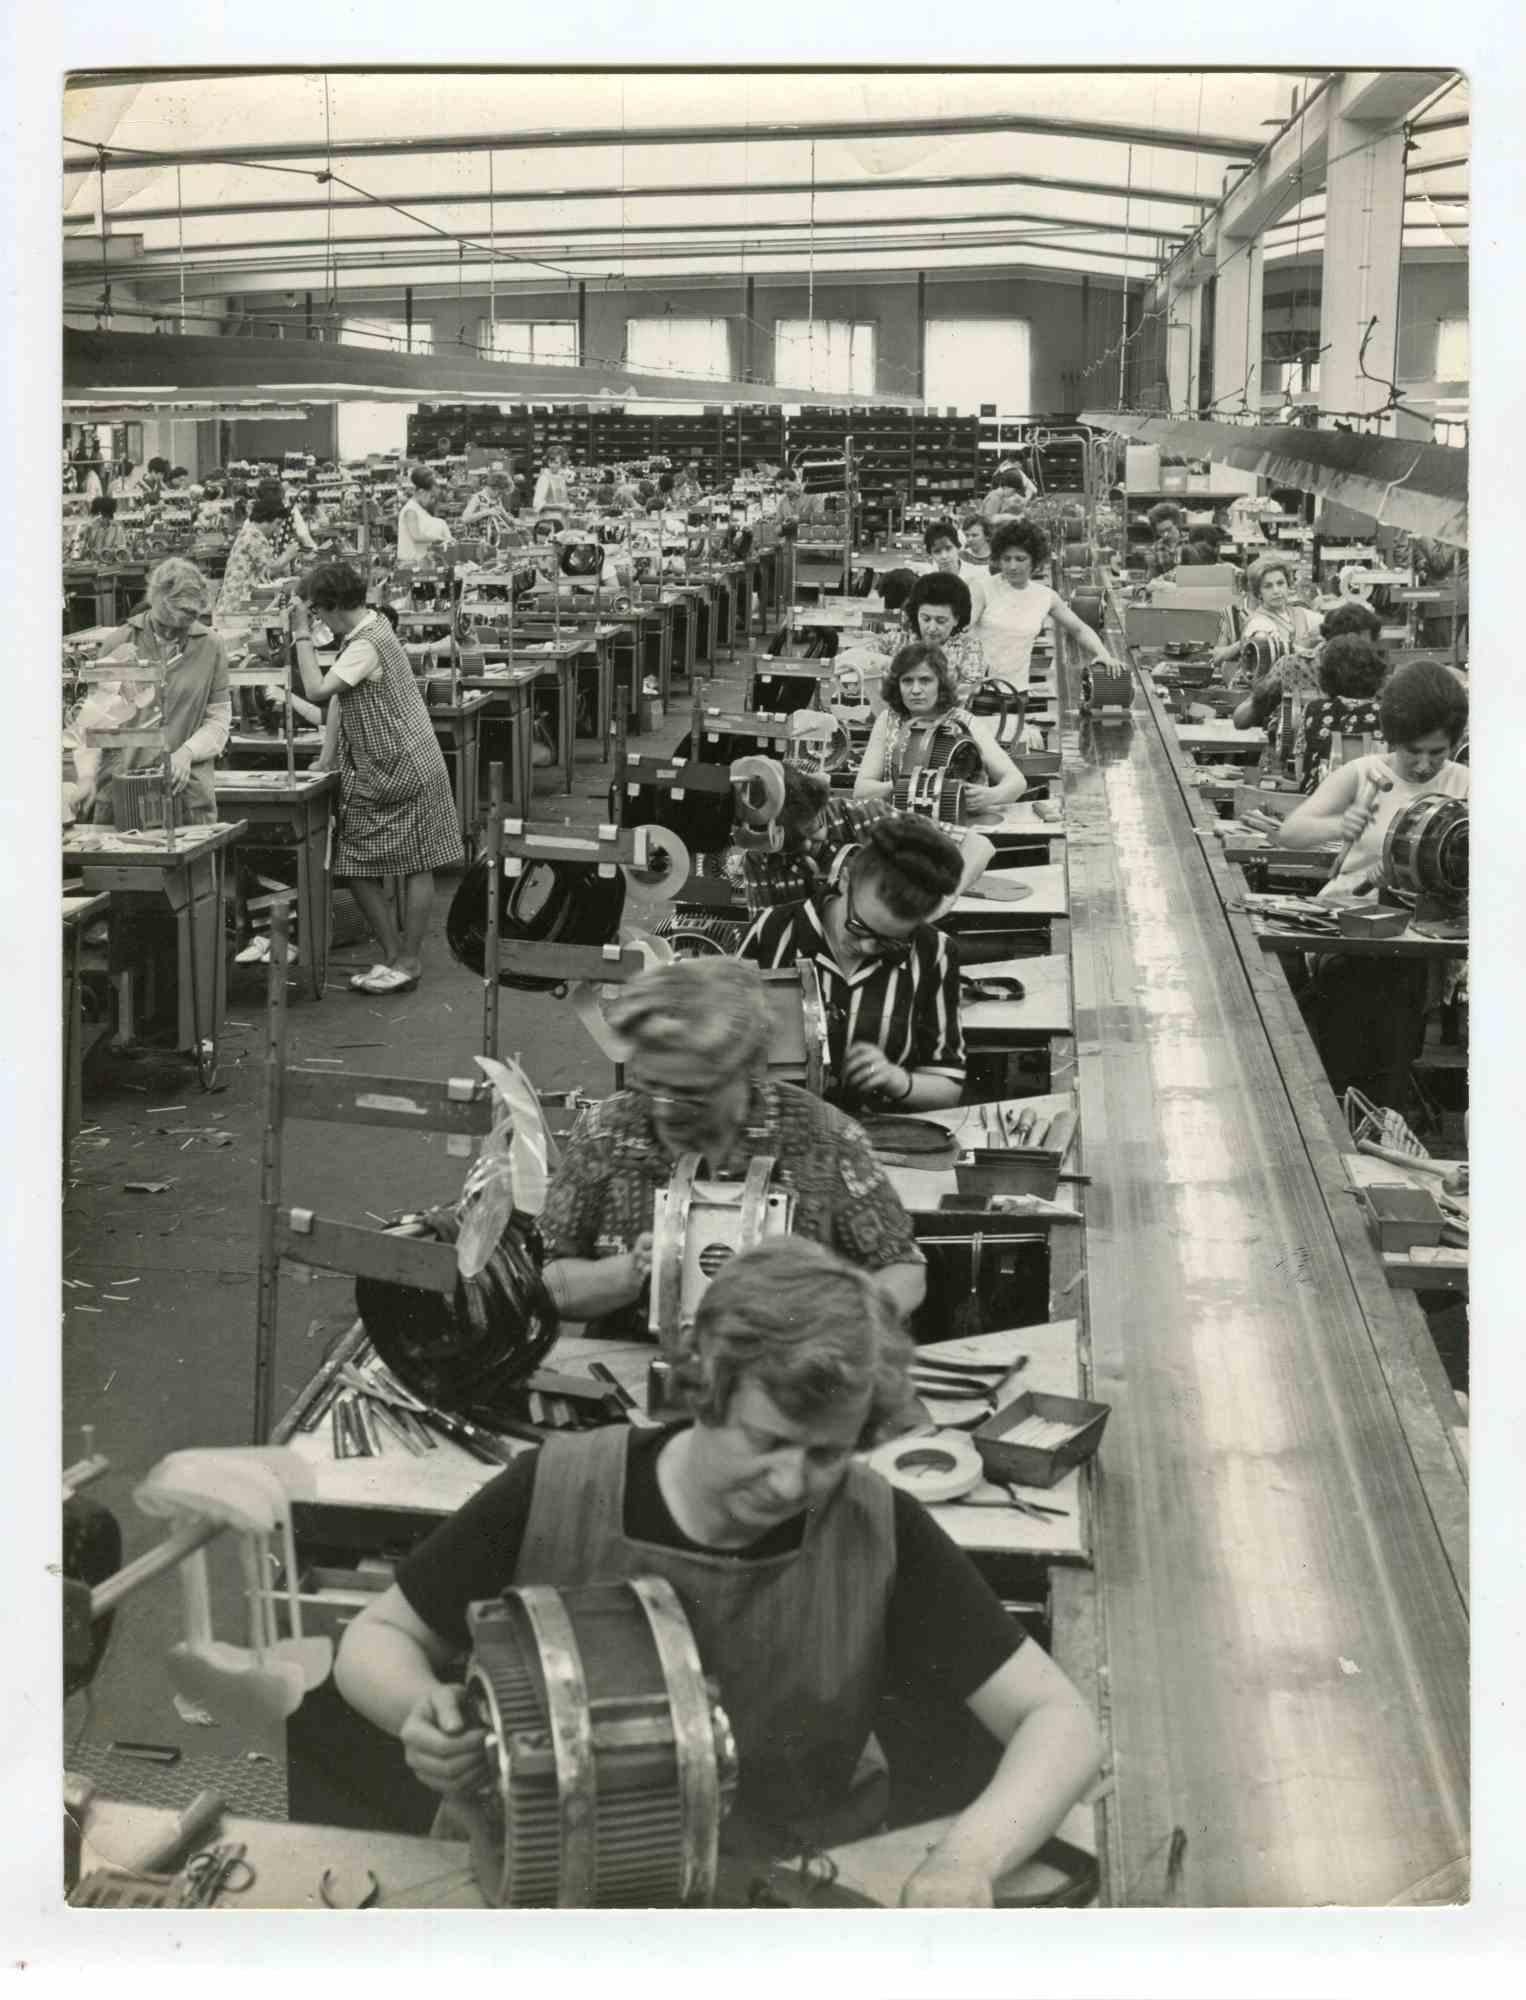 Unknown Portrait Photograph - Women at Work - Vintage Photograph About Women Rights - 1960s